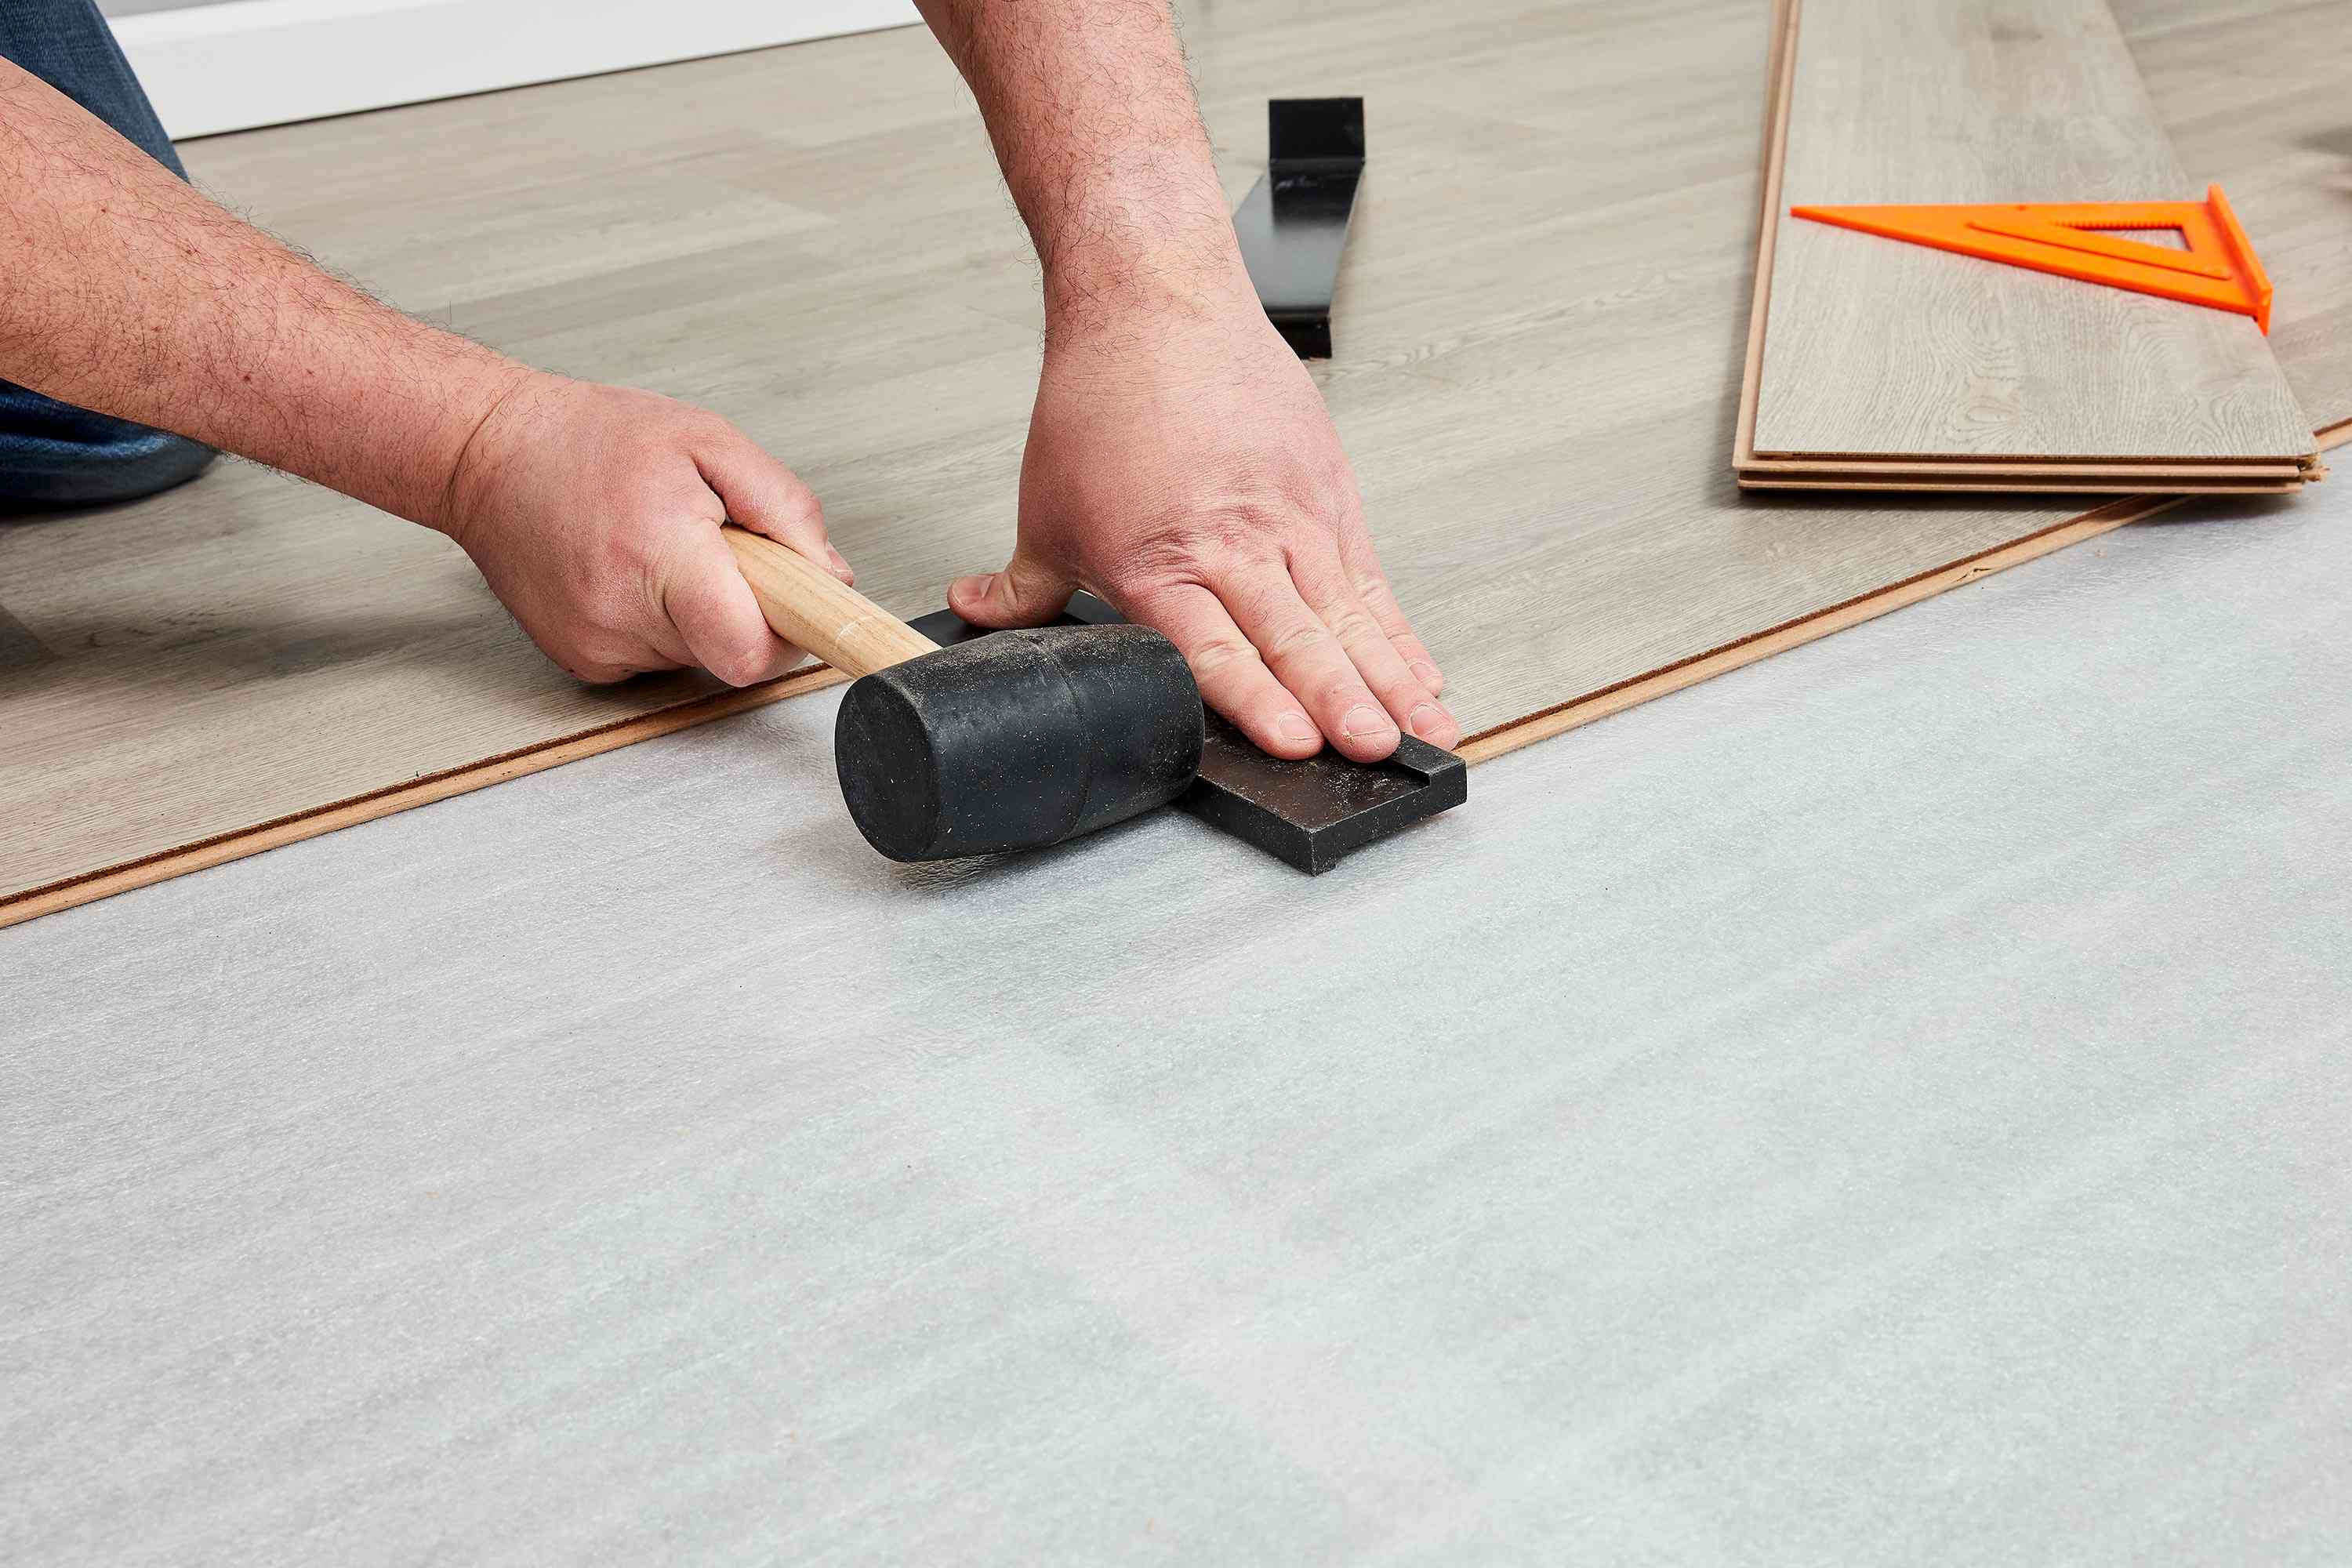 Could This Flooring Be the Perfect Choice for Your Home. Weighing the Pros and Cons of Marine Vinyl Flooring From Amazon